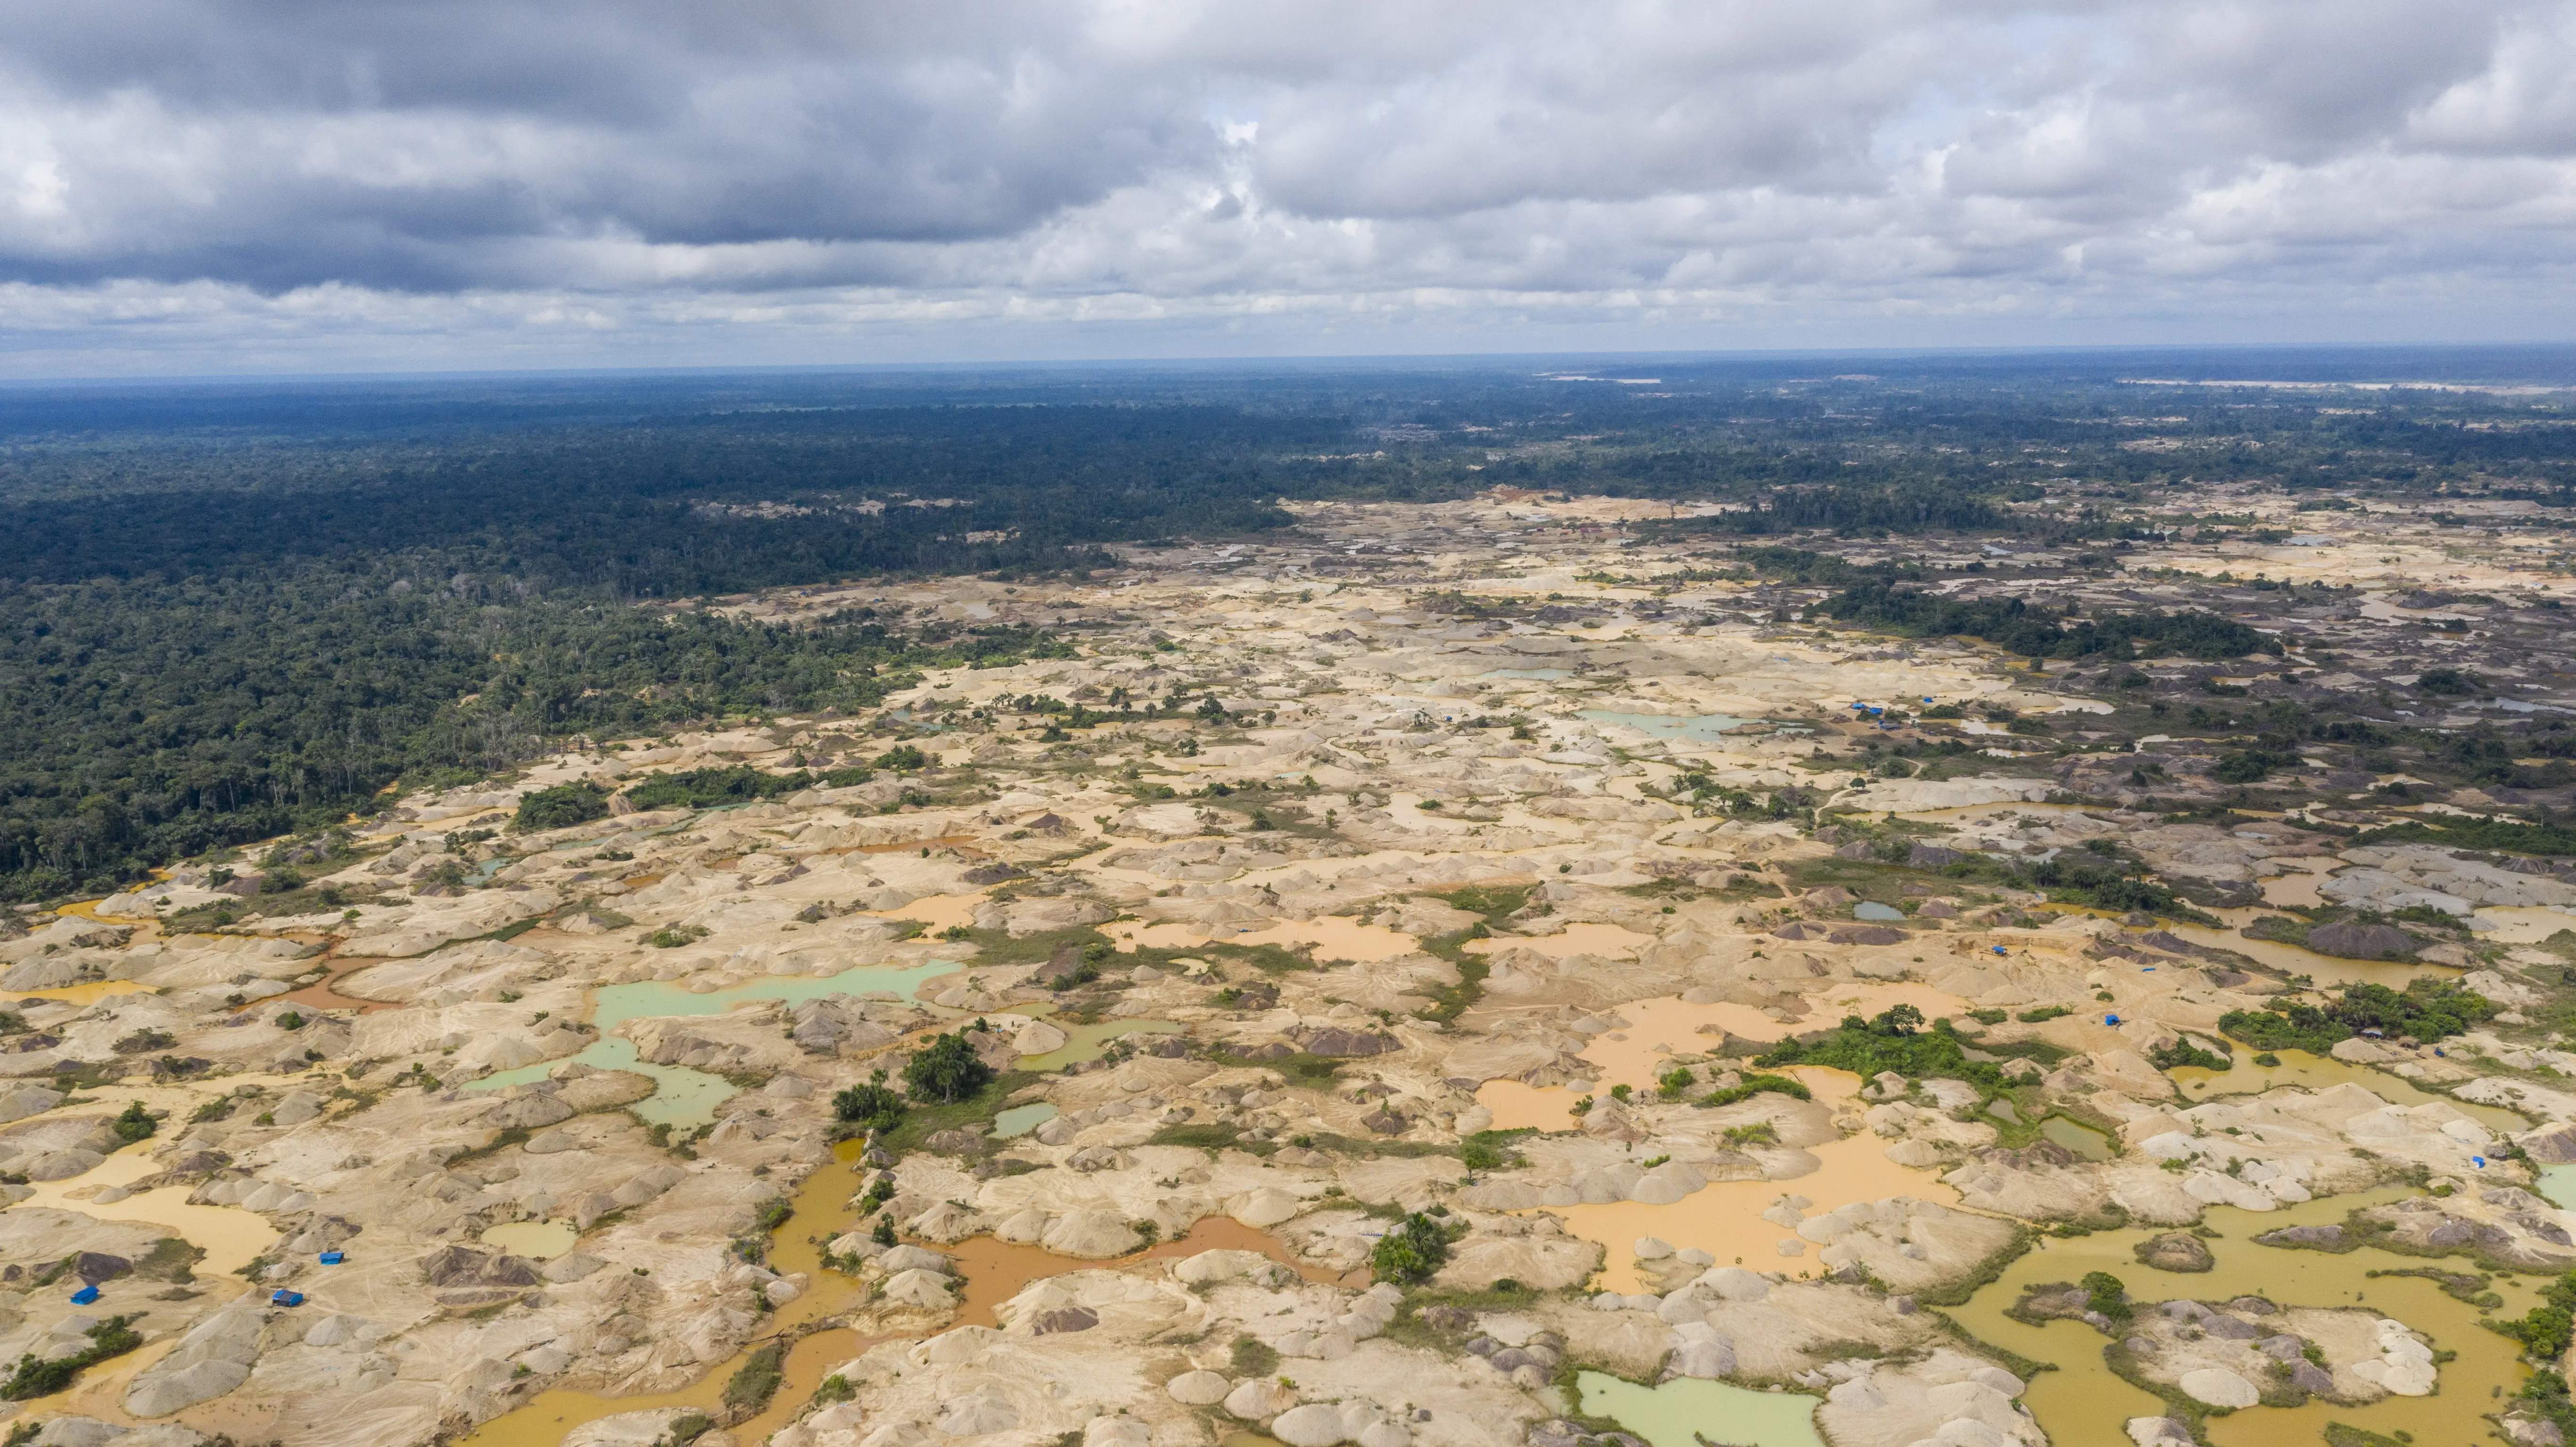 A stark, aerial image of mining runoff and deforestation. A mottled beige where there should be lush green.